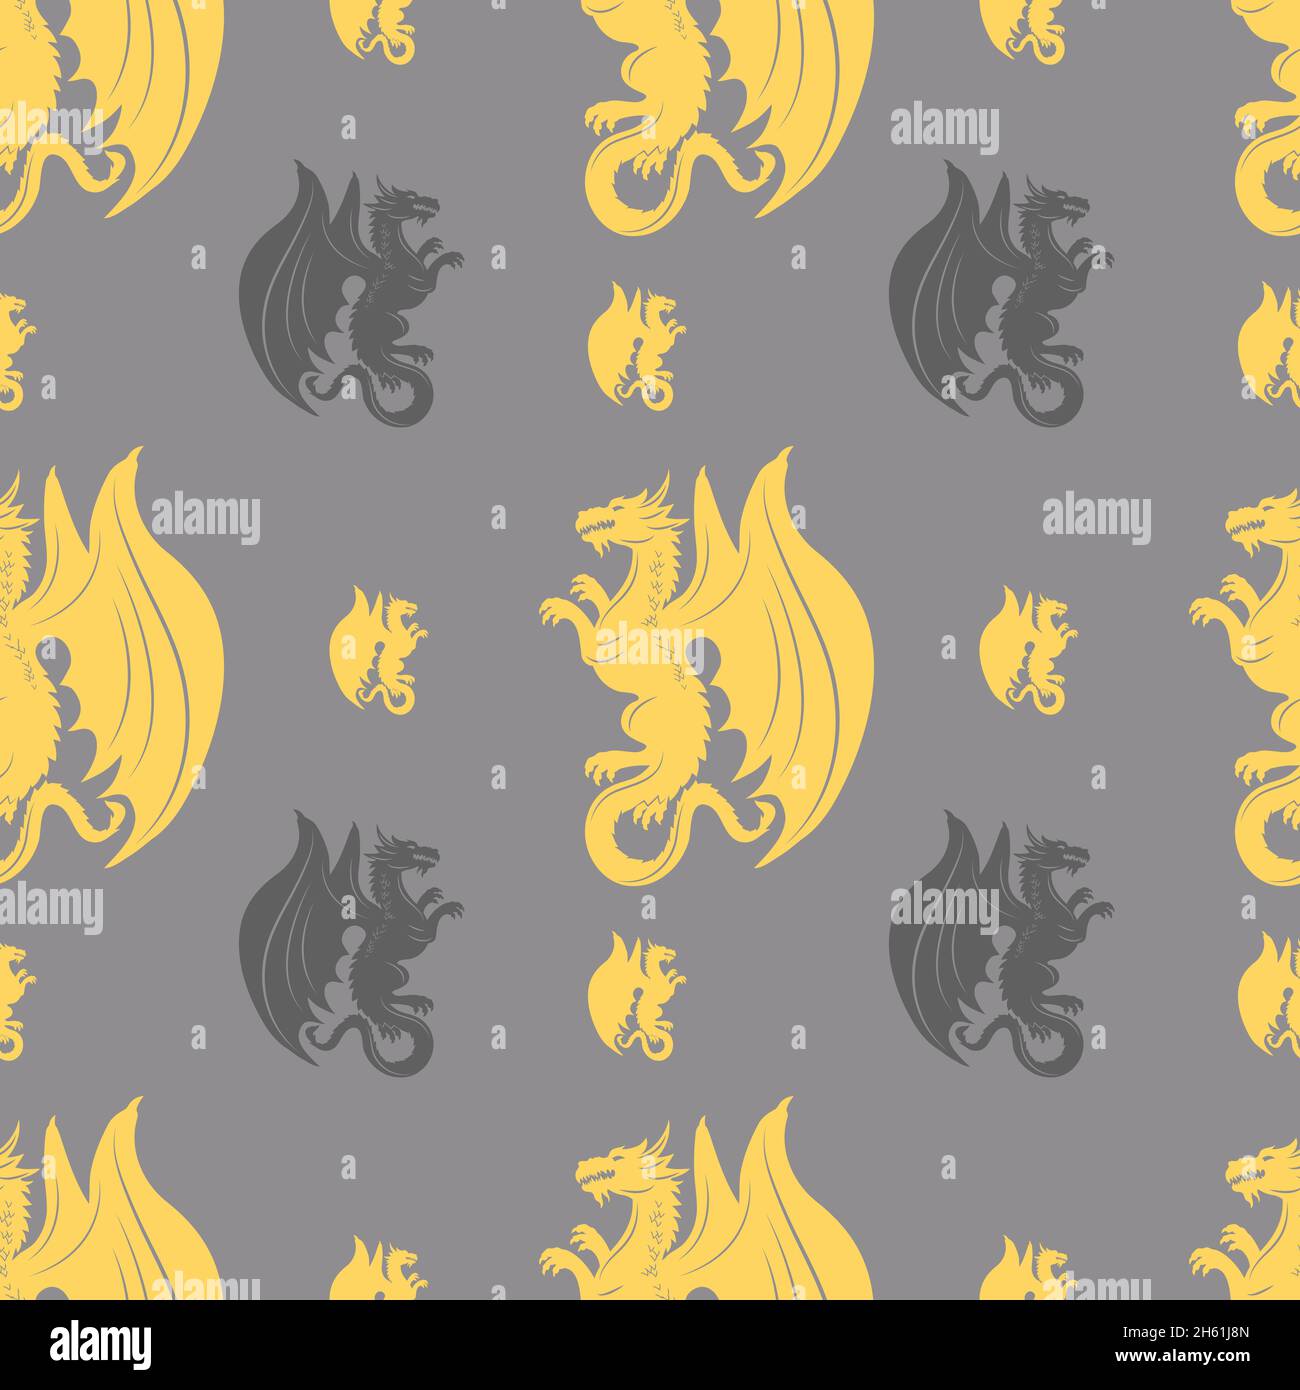 Silhouettes of a golden dragon seamless pattern with wings. Stock Vector